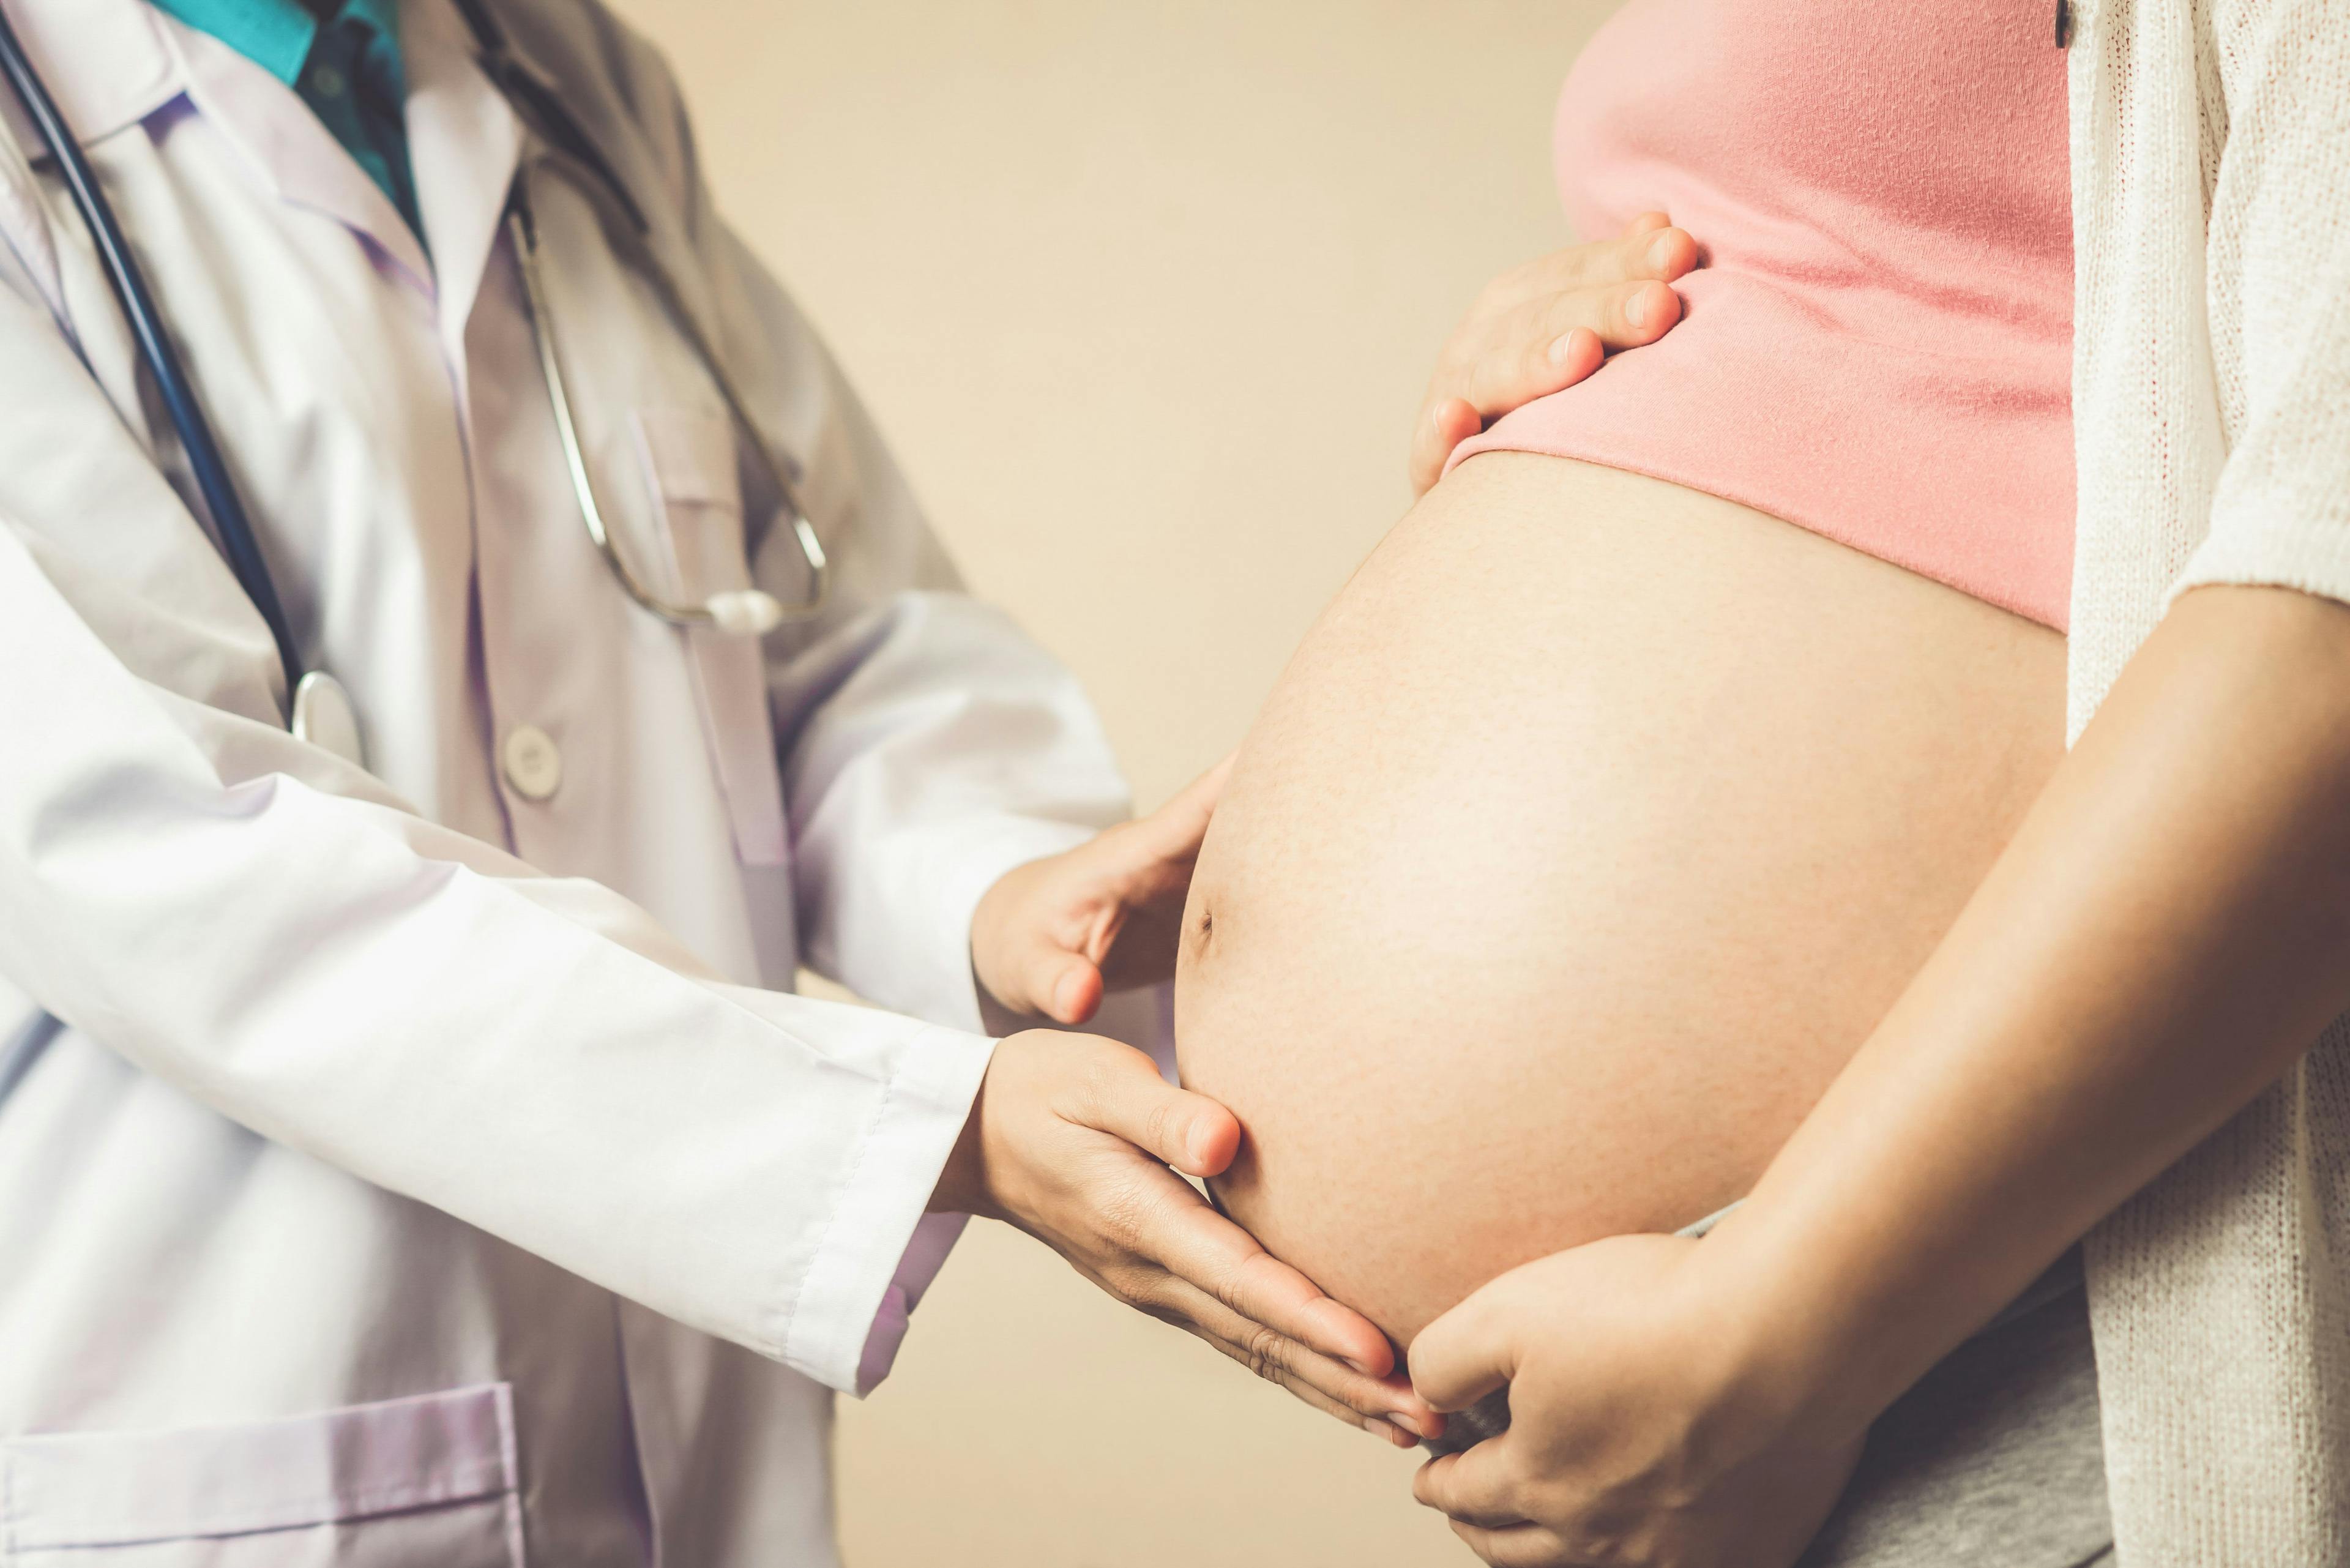 Summary of Society for Maternal-Fetal Medicine (SMFM) Consult Series #52: Diagnosis and management of fetal growth restriction